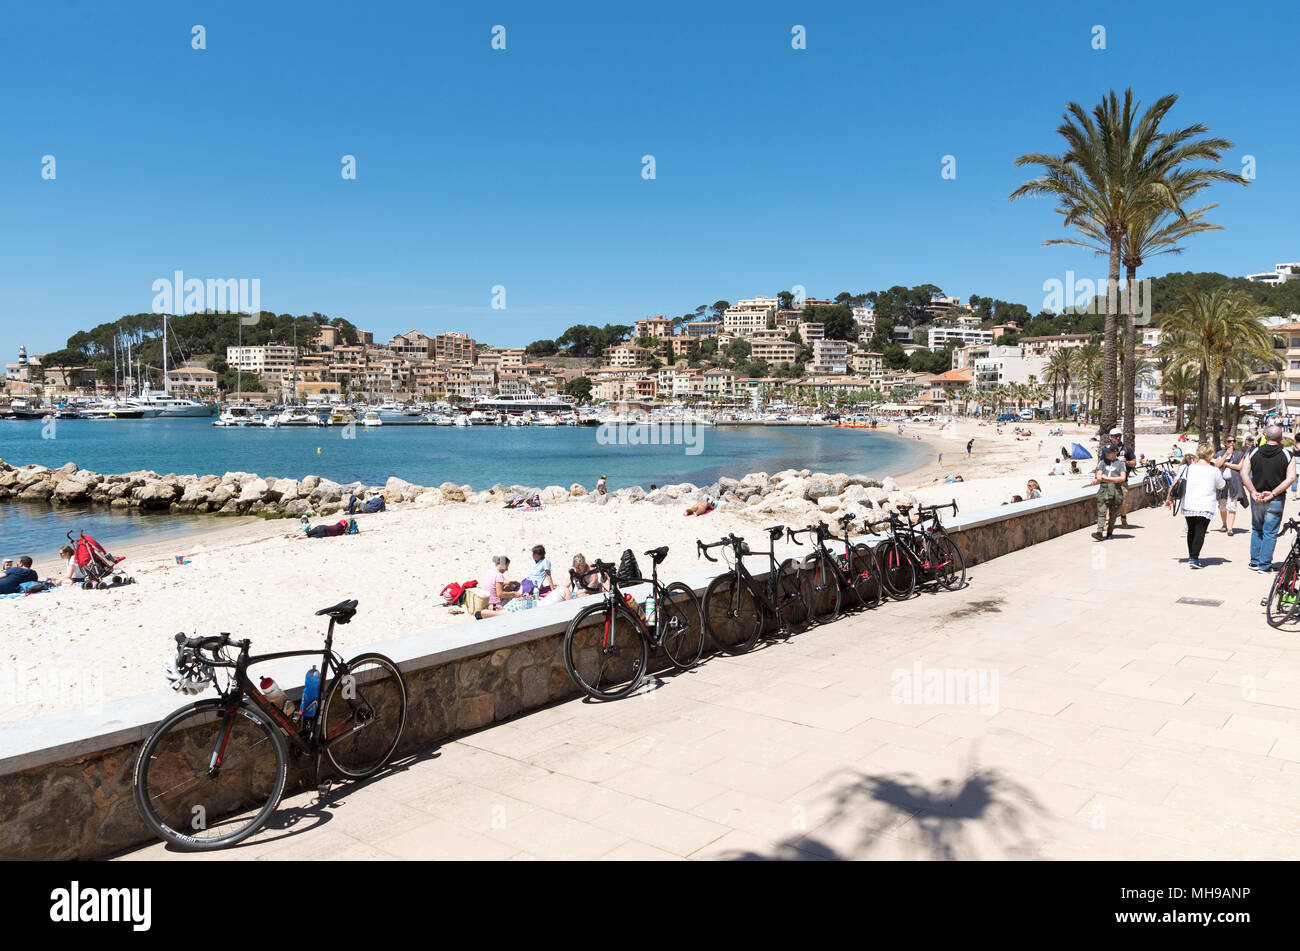 Port de Soller, Mallorca, Balearic Island, Spain. 2018. The seafront and harbour at Port de Soller a popular holiday resort in Mallorca. Stock Photo